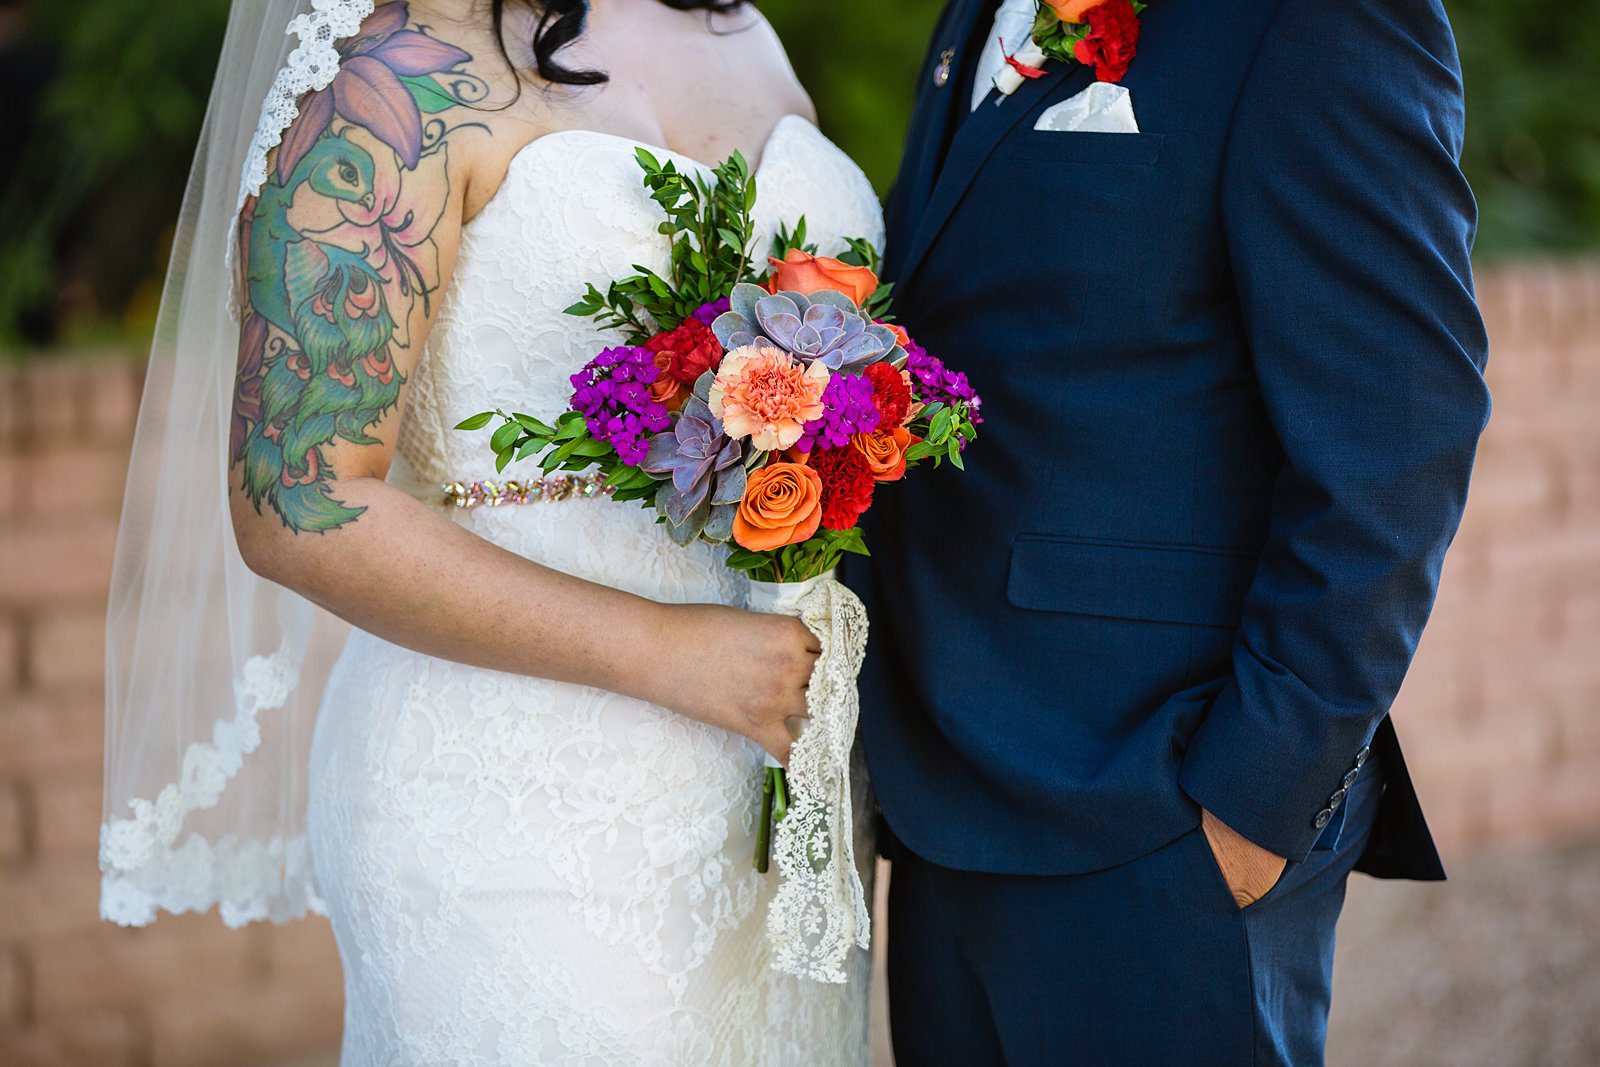 Romantic bride and groom's wedding day outfits at a colorful fiesta wedding.